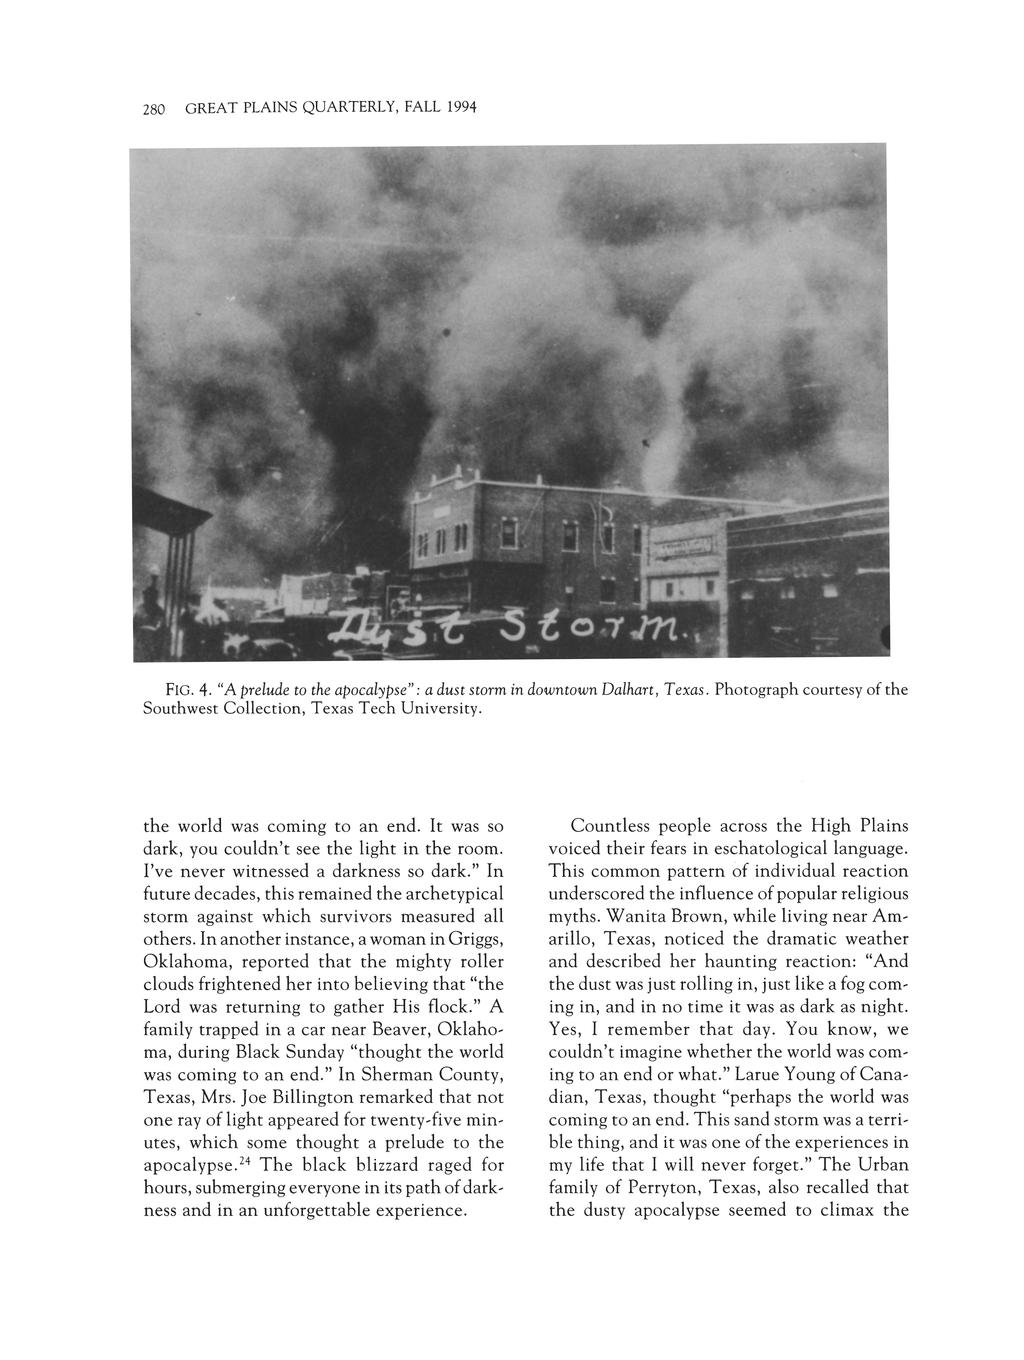 280 GREAT PLAINS QUARTERLY, FALL 1994 FIG. 4. "A prelude to the apocalypse": a dust storm in downtown Dalhart, Texas. Photograph courtesy of the Southwest Collection, Texas Tech University.